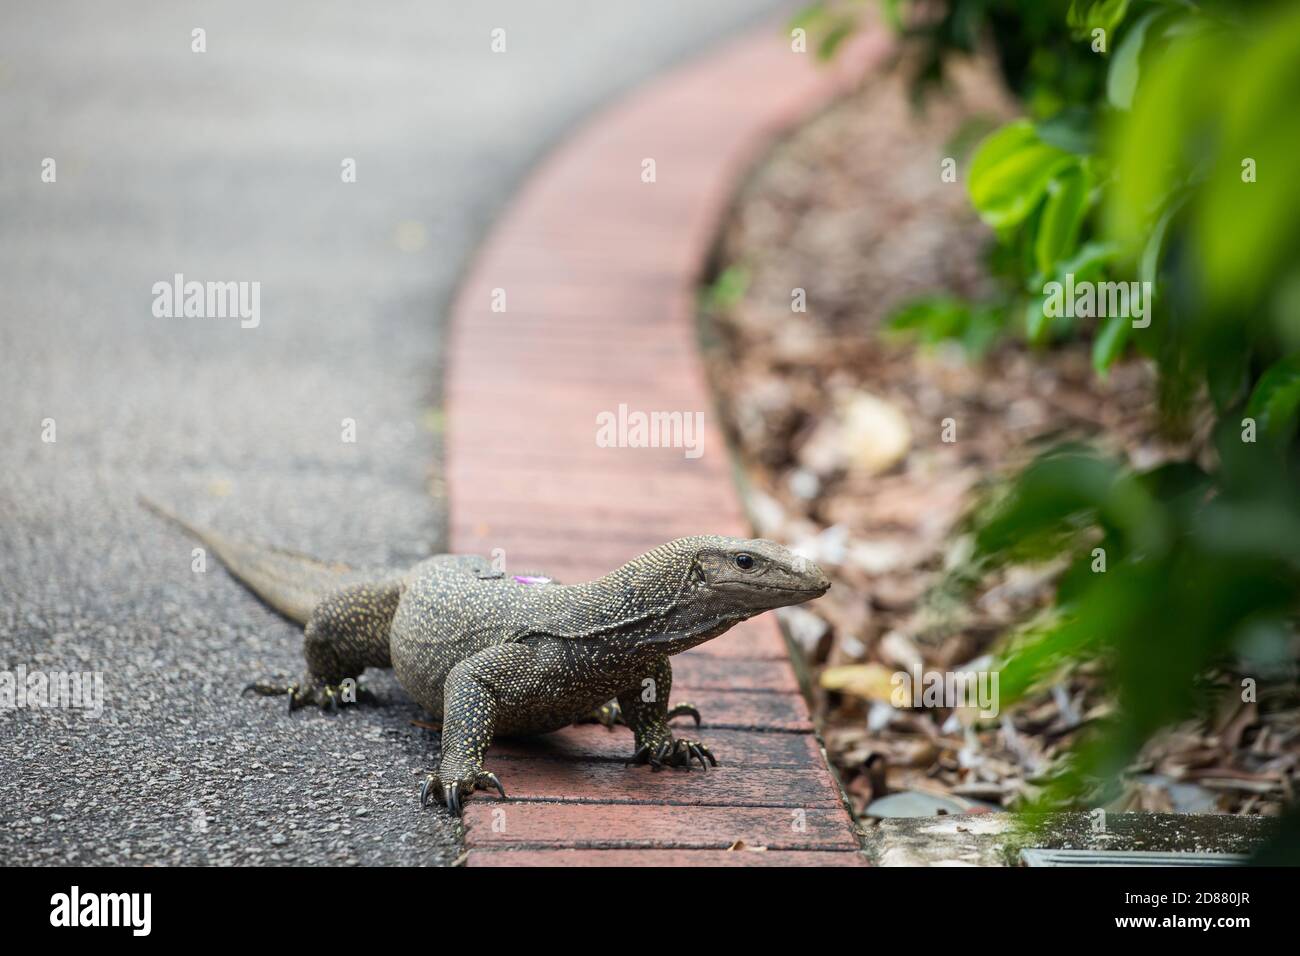 A medium size wild monitor lizard emerge from bush and taking a walk on the pavement, a very common sight at Singapore Botanic Gardens. Stock Photo